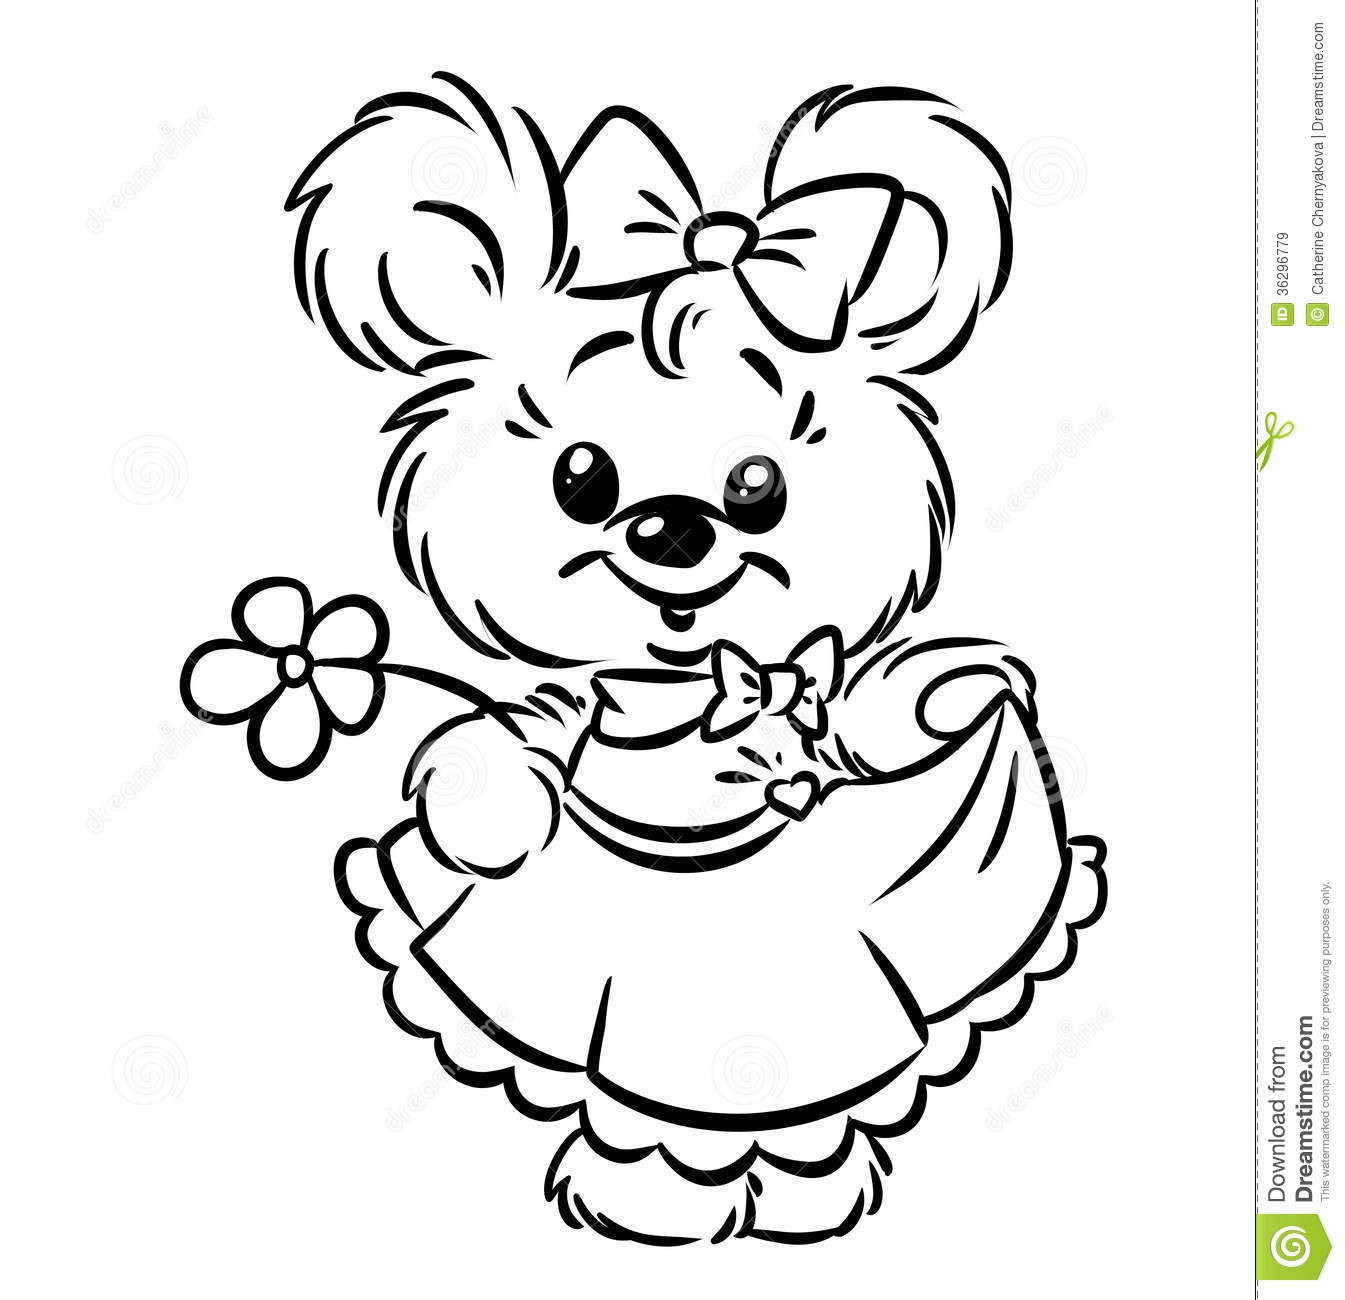 Flower Girl Coloring Pages
 Flower